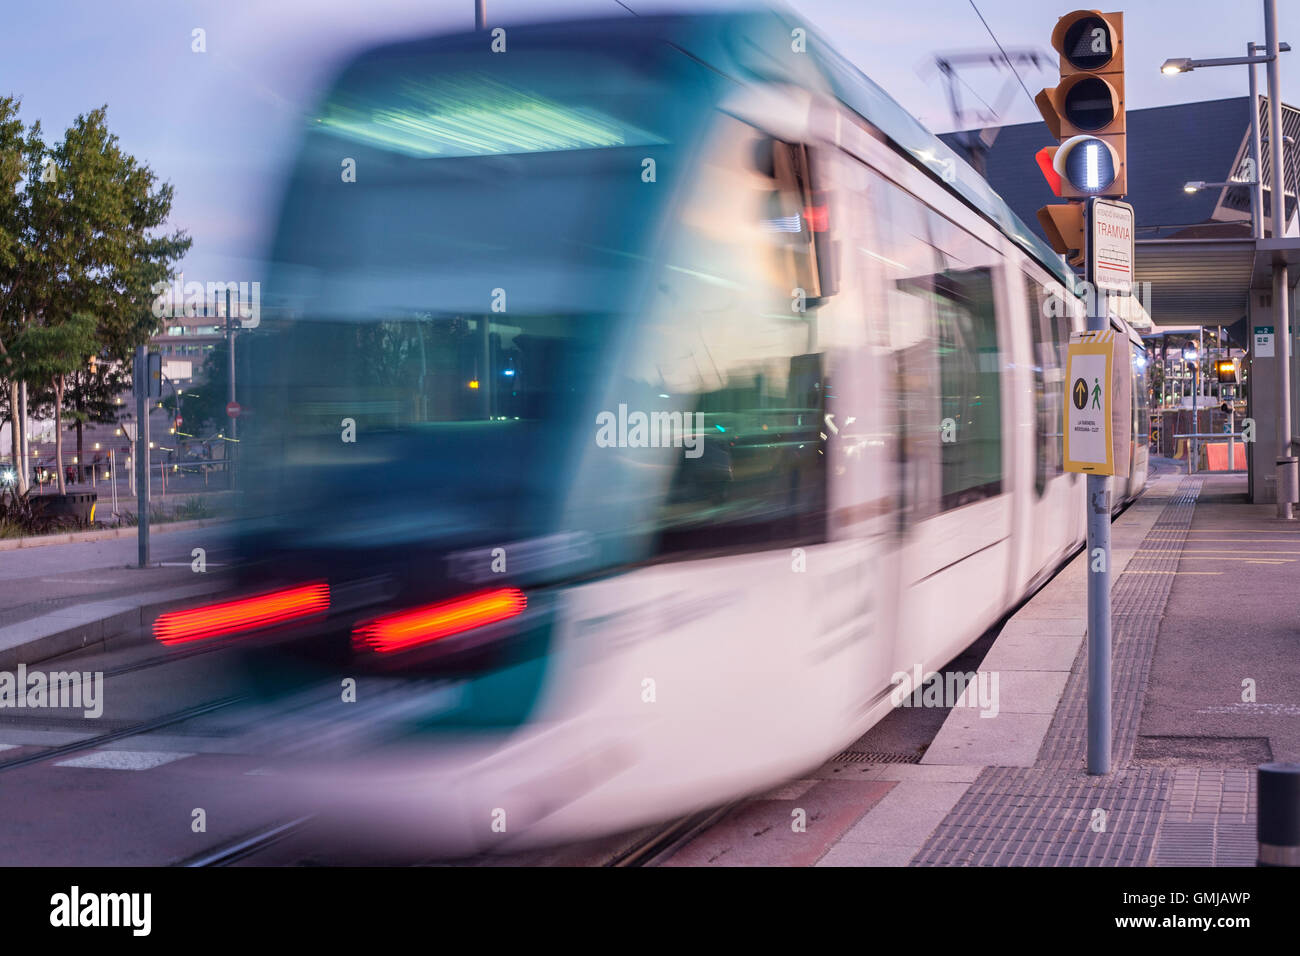 BARCELONA, SPAIN - JULY 27, 2016: Barcelona tram in motion. The tram is going through the Diagonal avenue Stock Photo